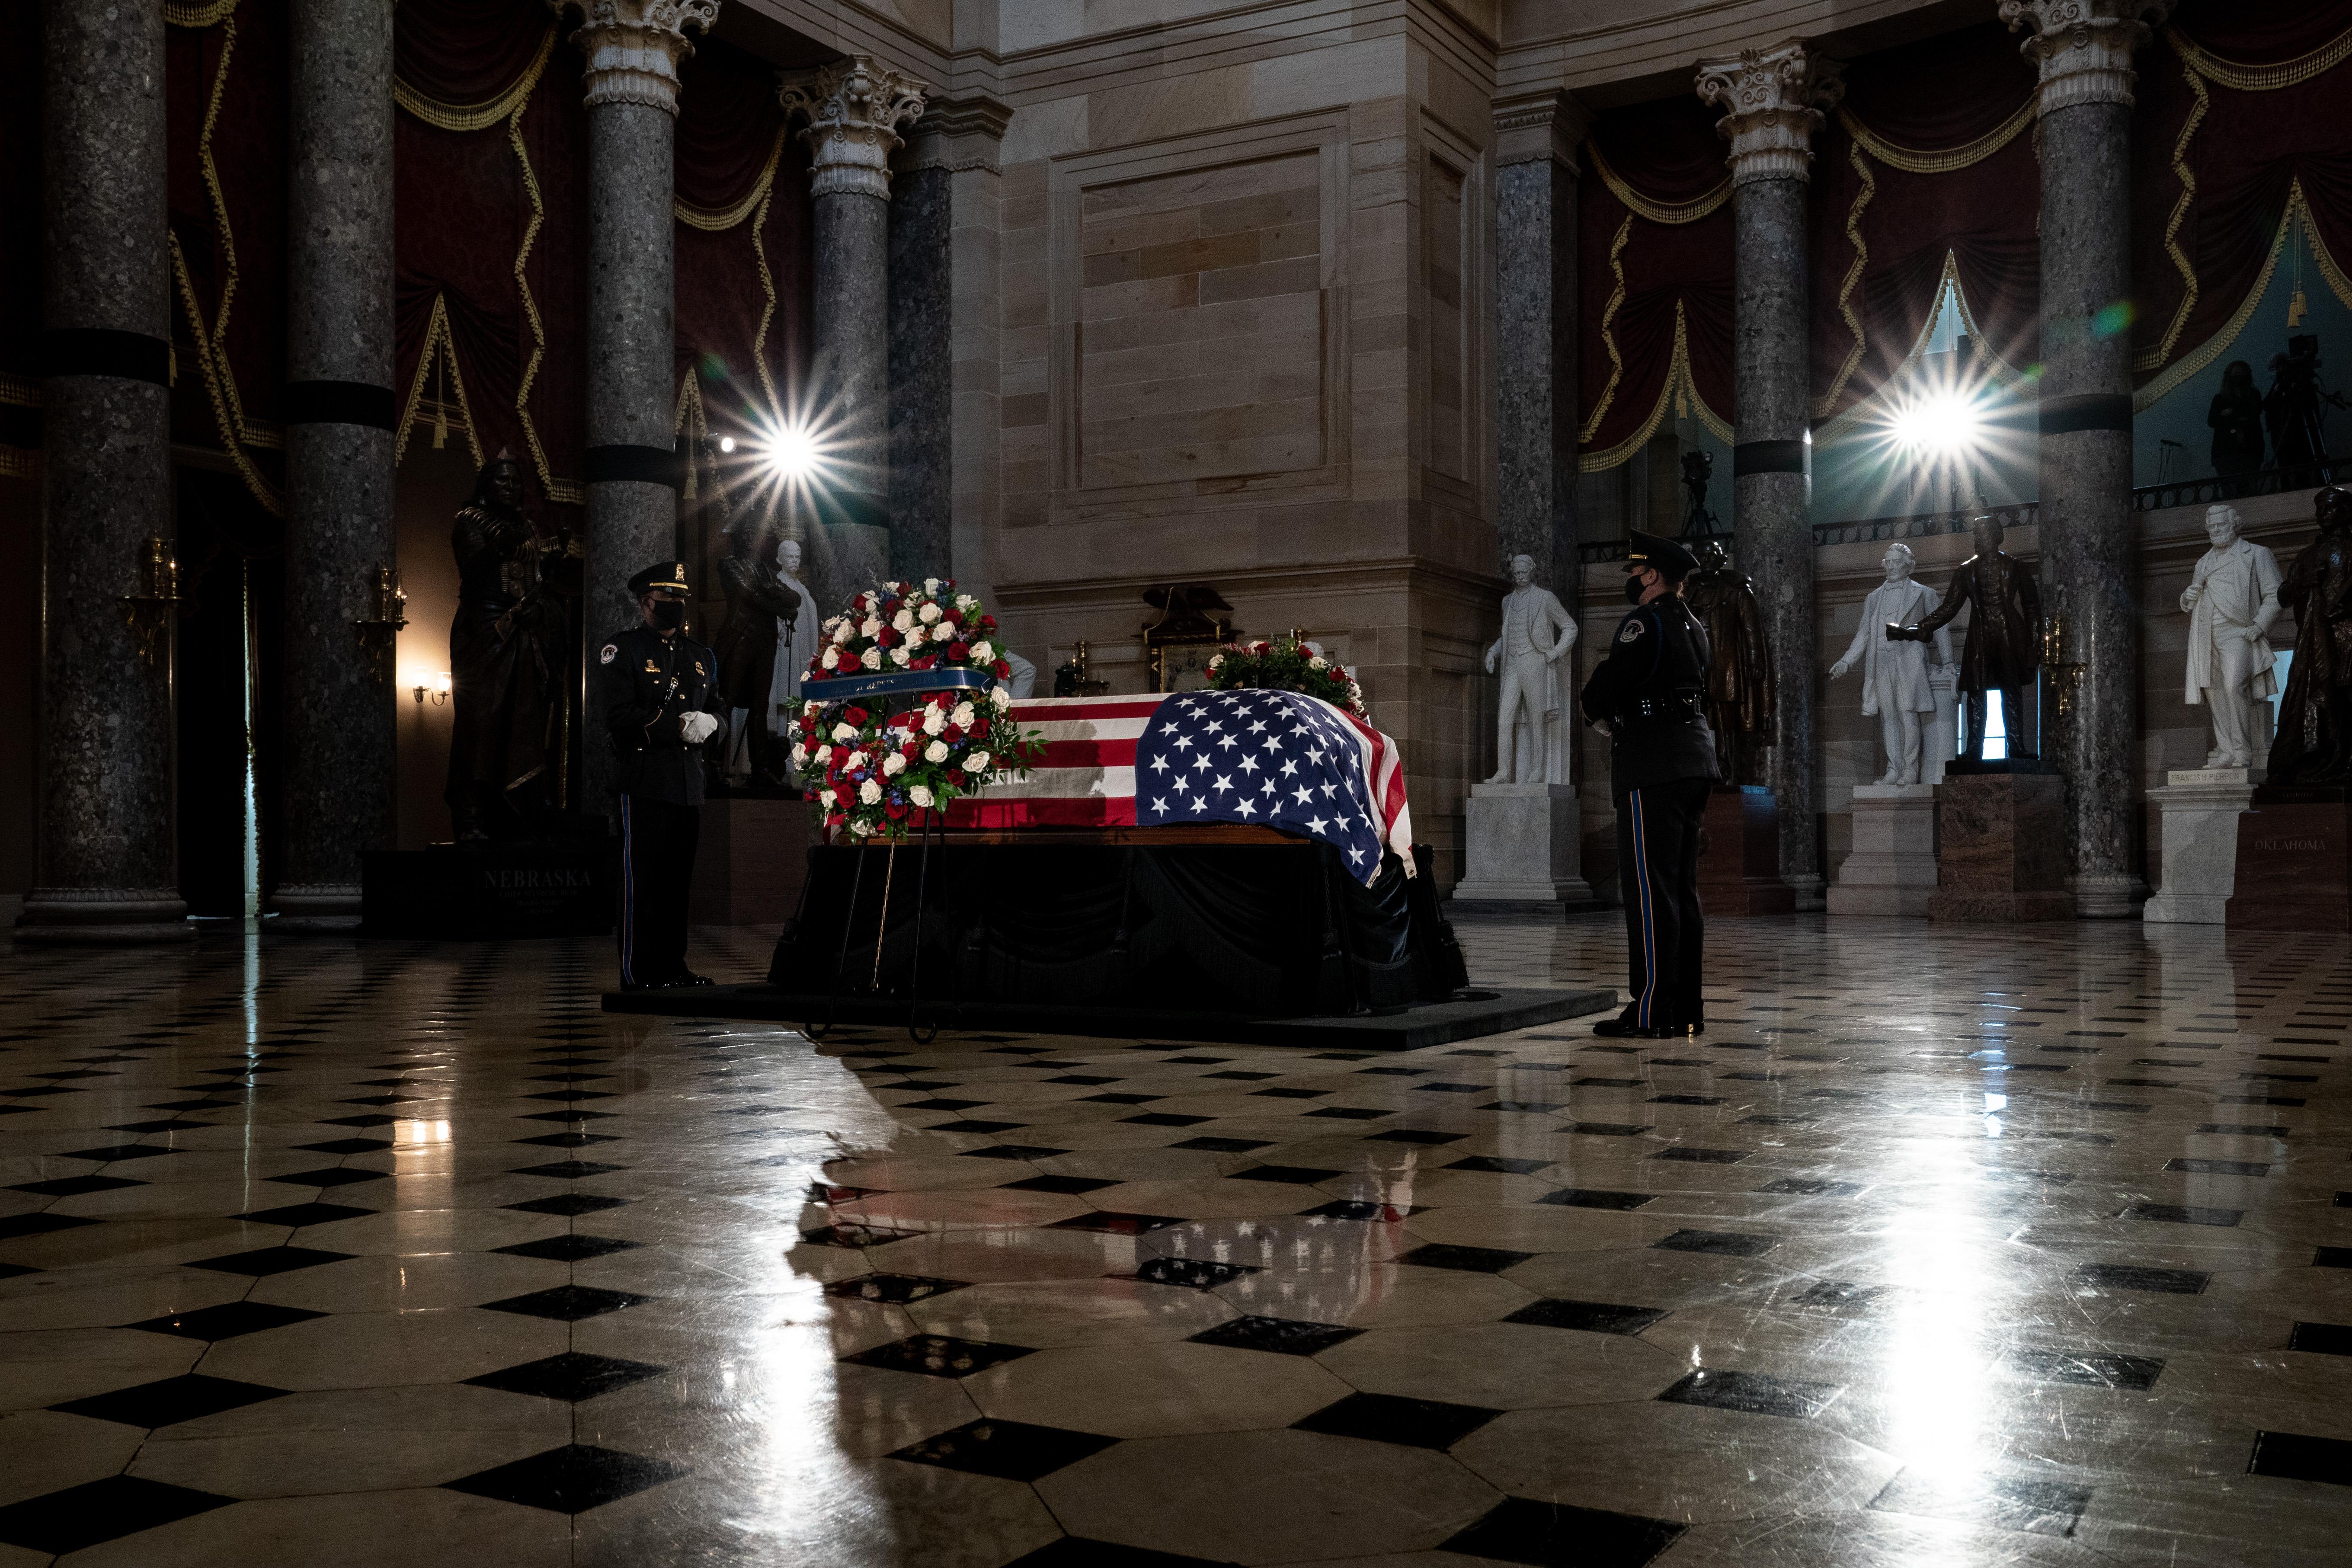 The flag-draped casket of the late Associate Justice Ruth Bader Ginsburg lies in state in Statuary Hall of the US Capitol.